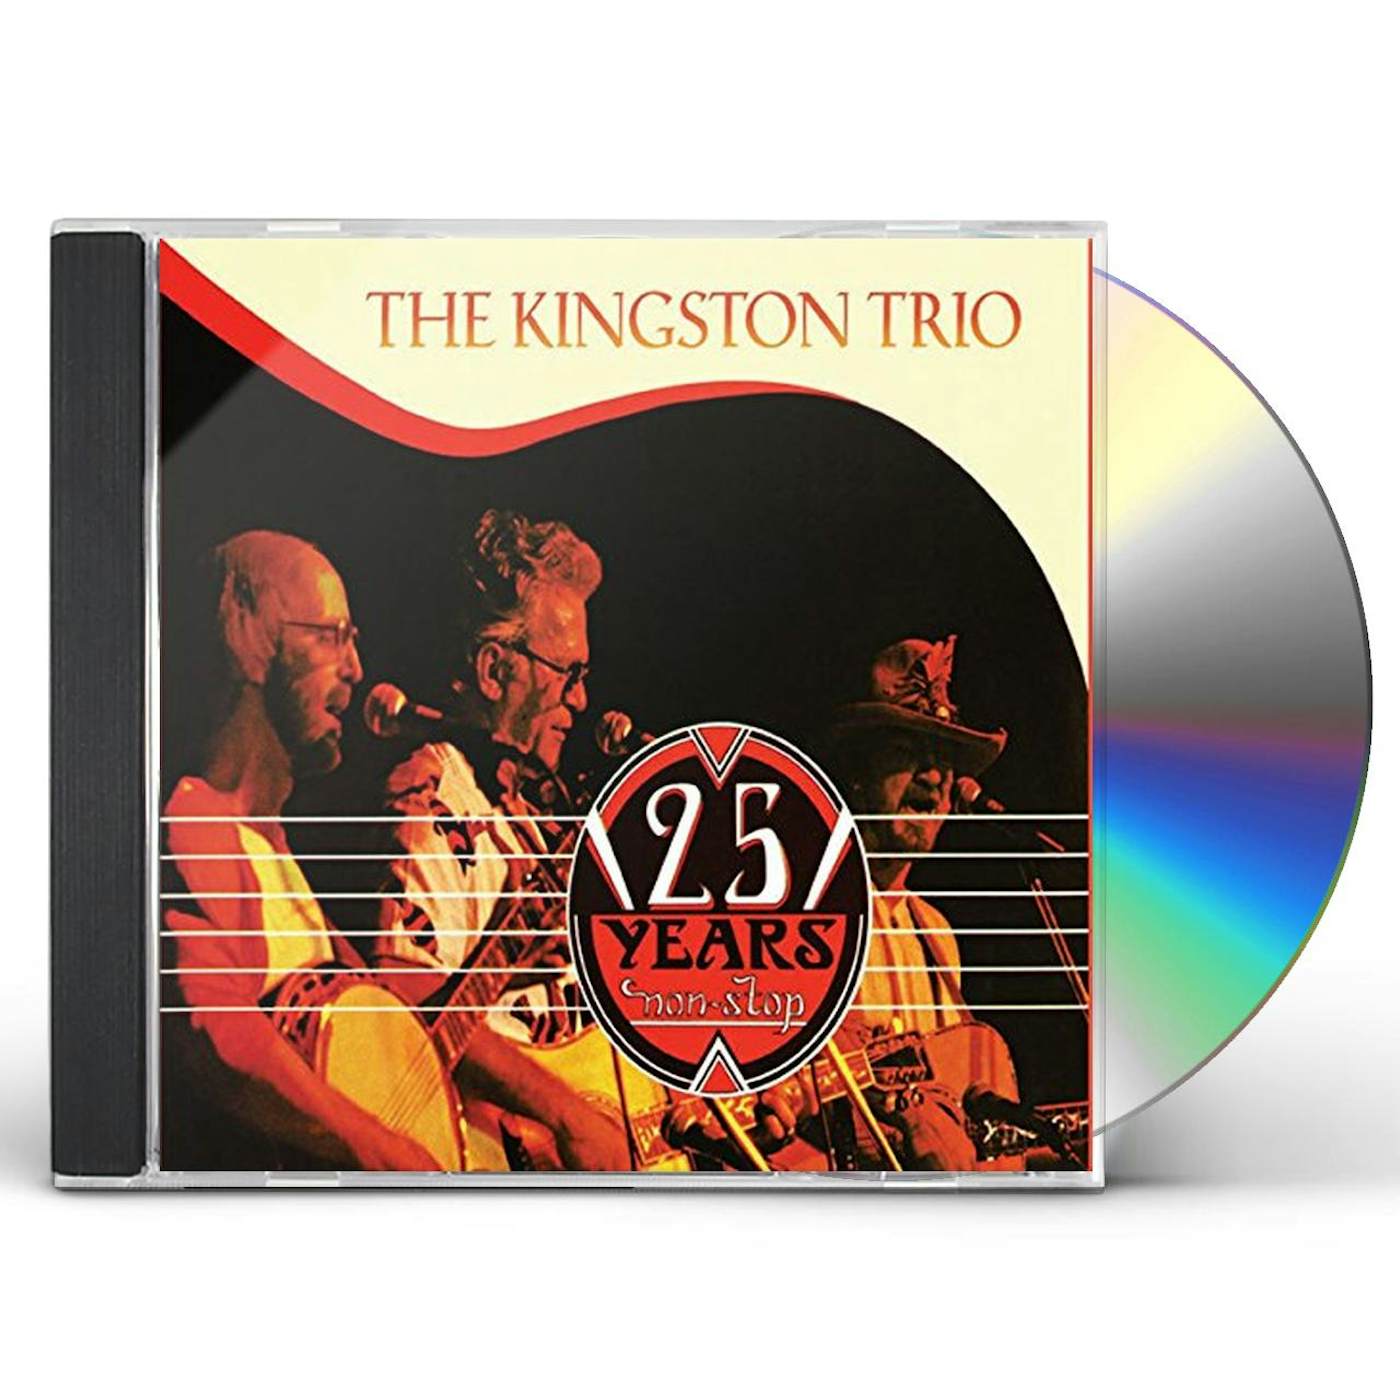 The Kingston Trio 25 YEARS NONSTOP CD